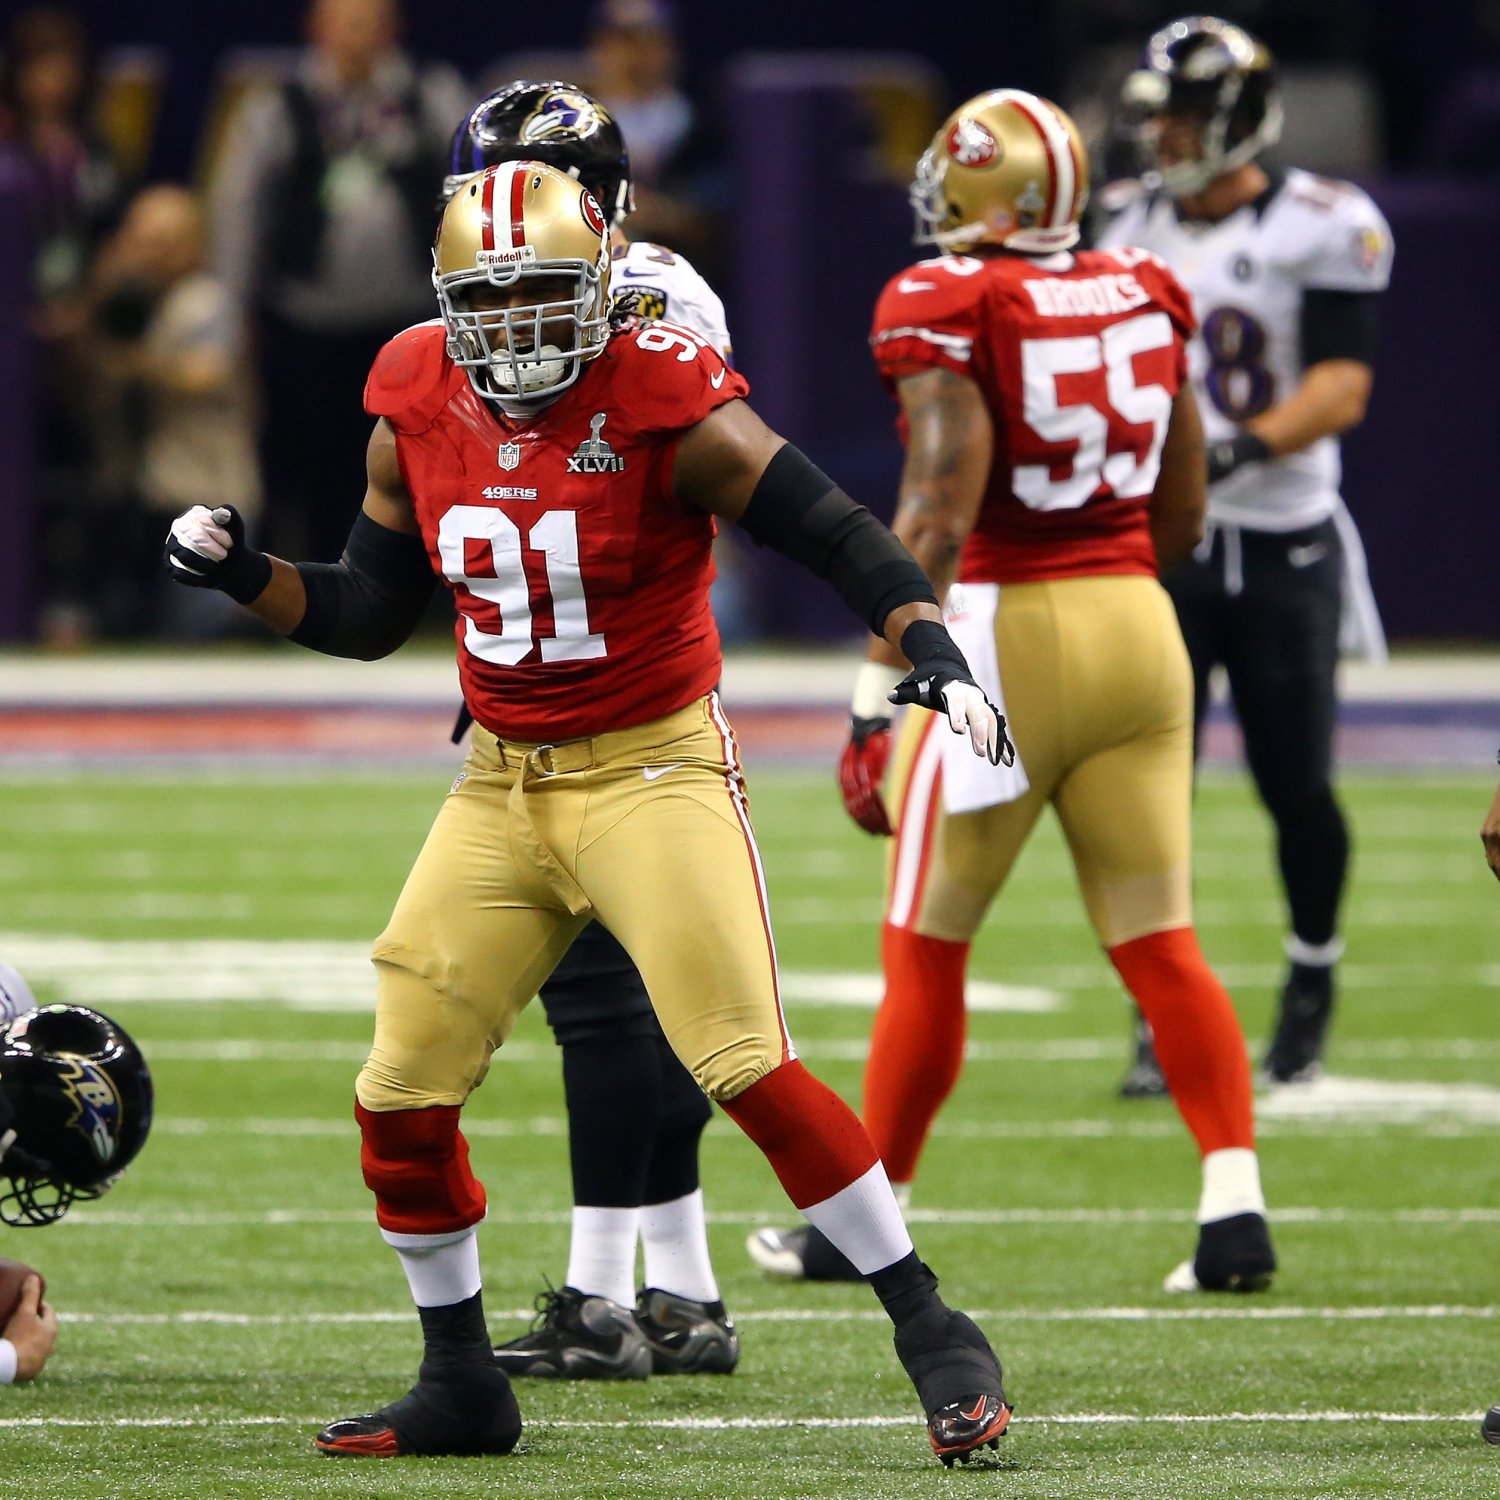 hi-res-160807321-ray-mcdonald-of-the-san-francisco-49ers-reacts-against_crop_exact.jpg